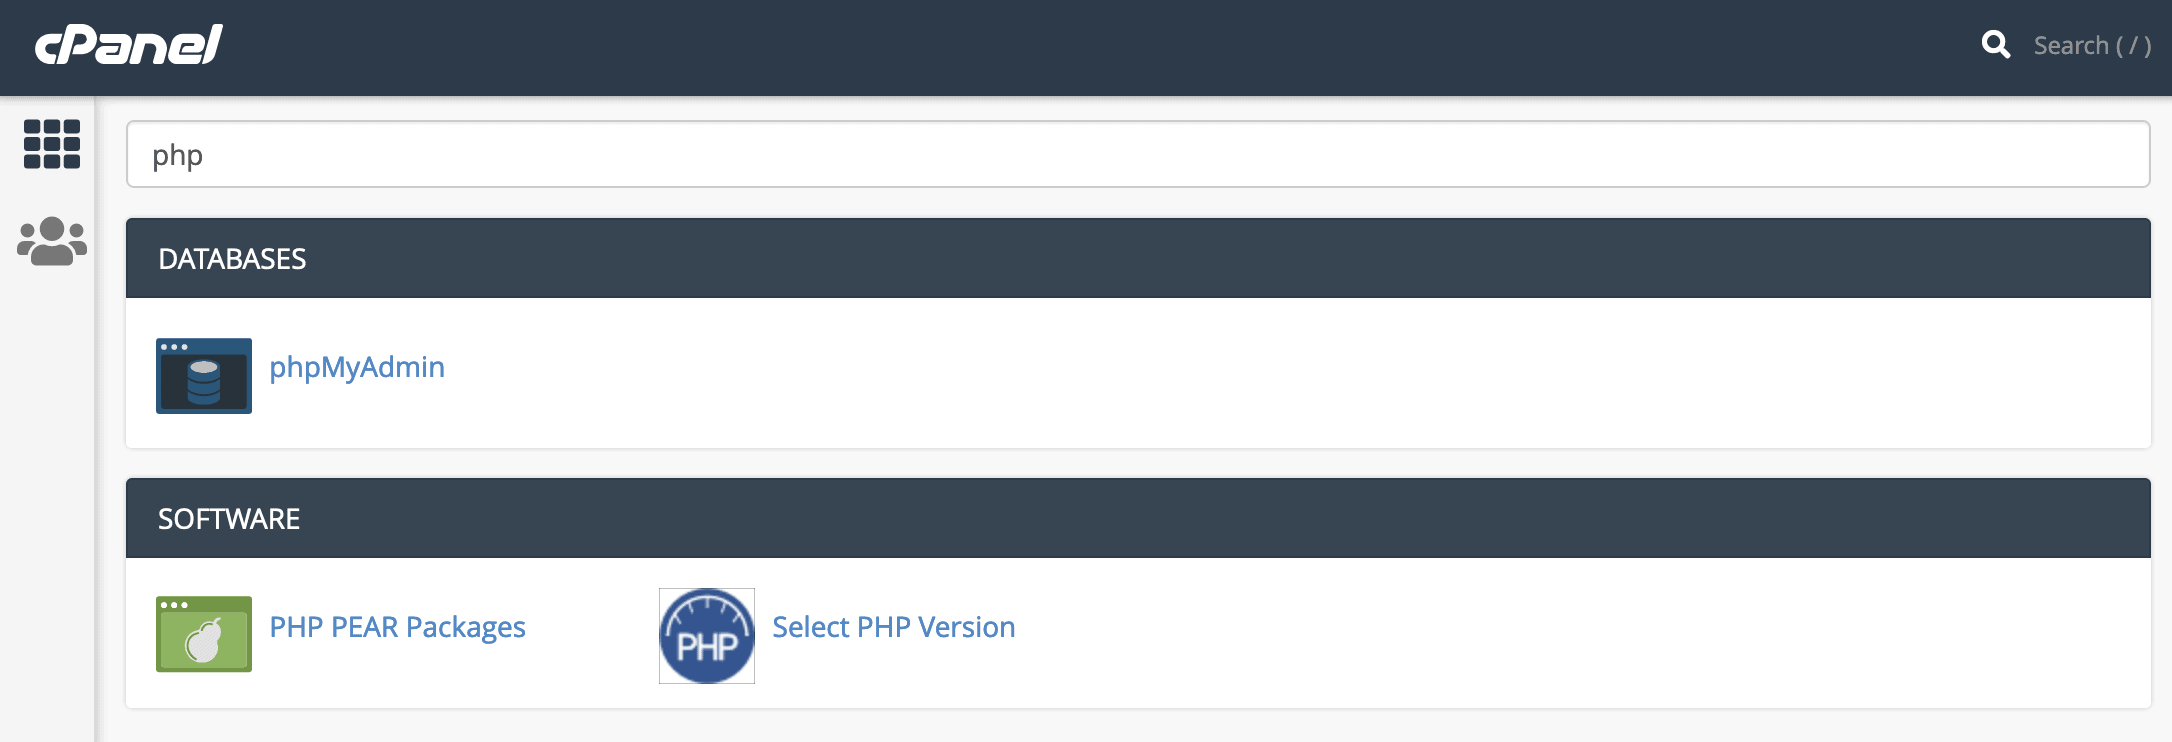 Select PHP Version in cPanel